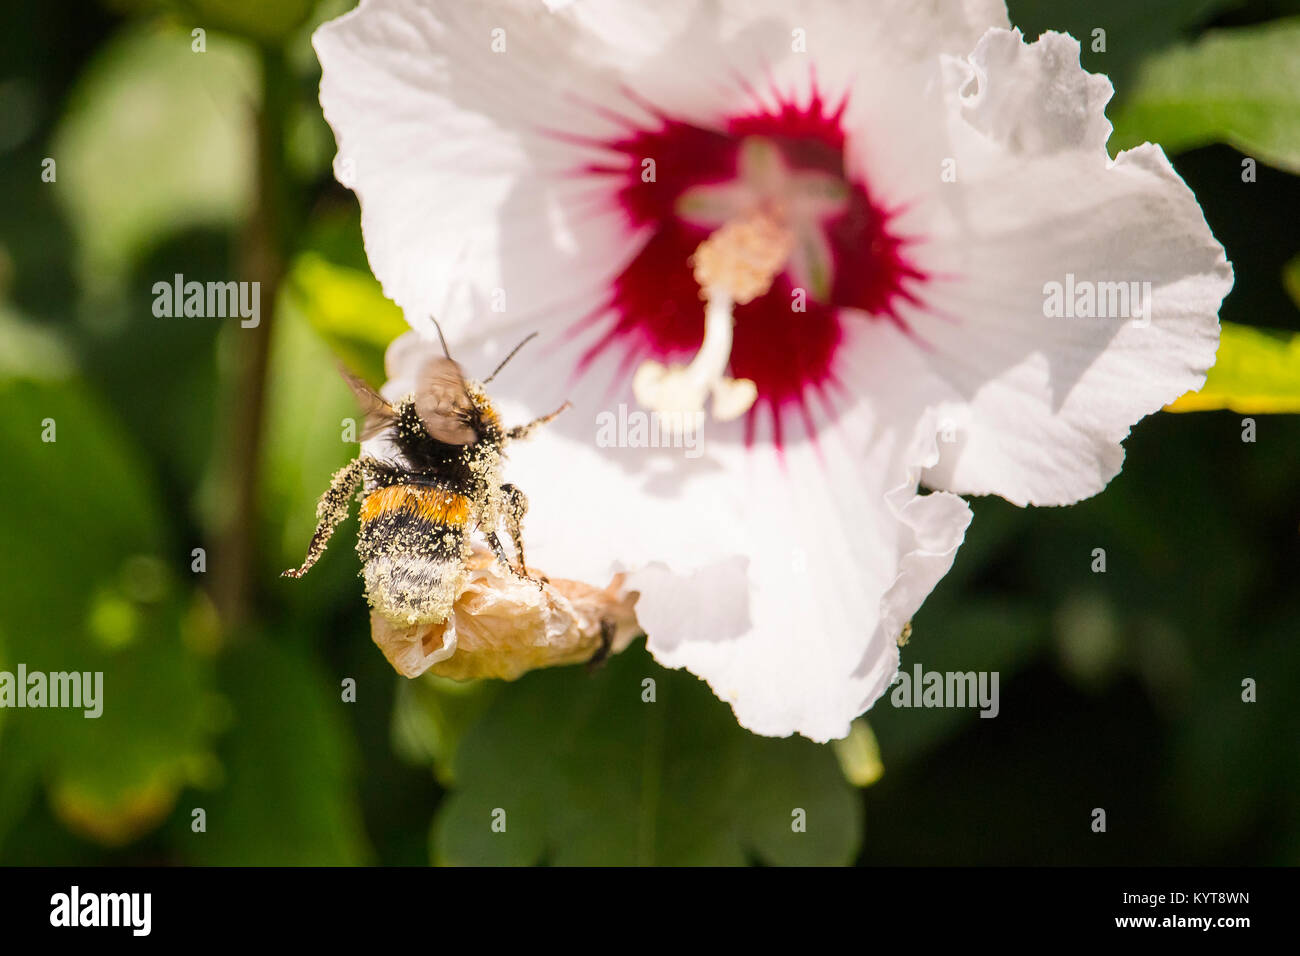 Flying bumblebee covered with pollen Stock Photo